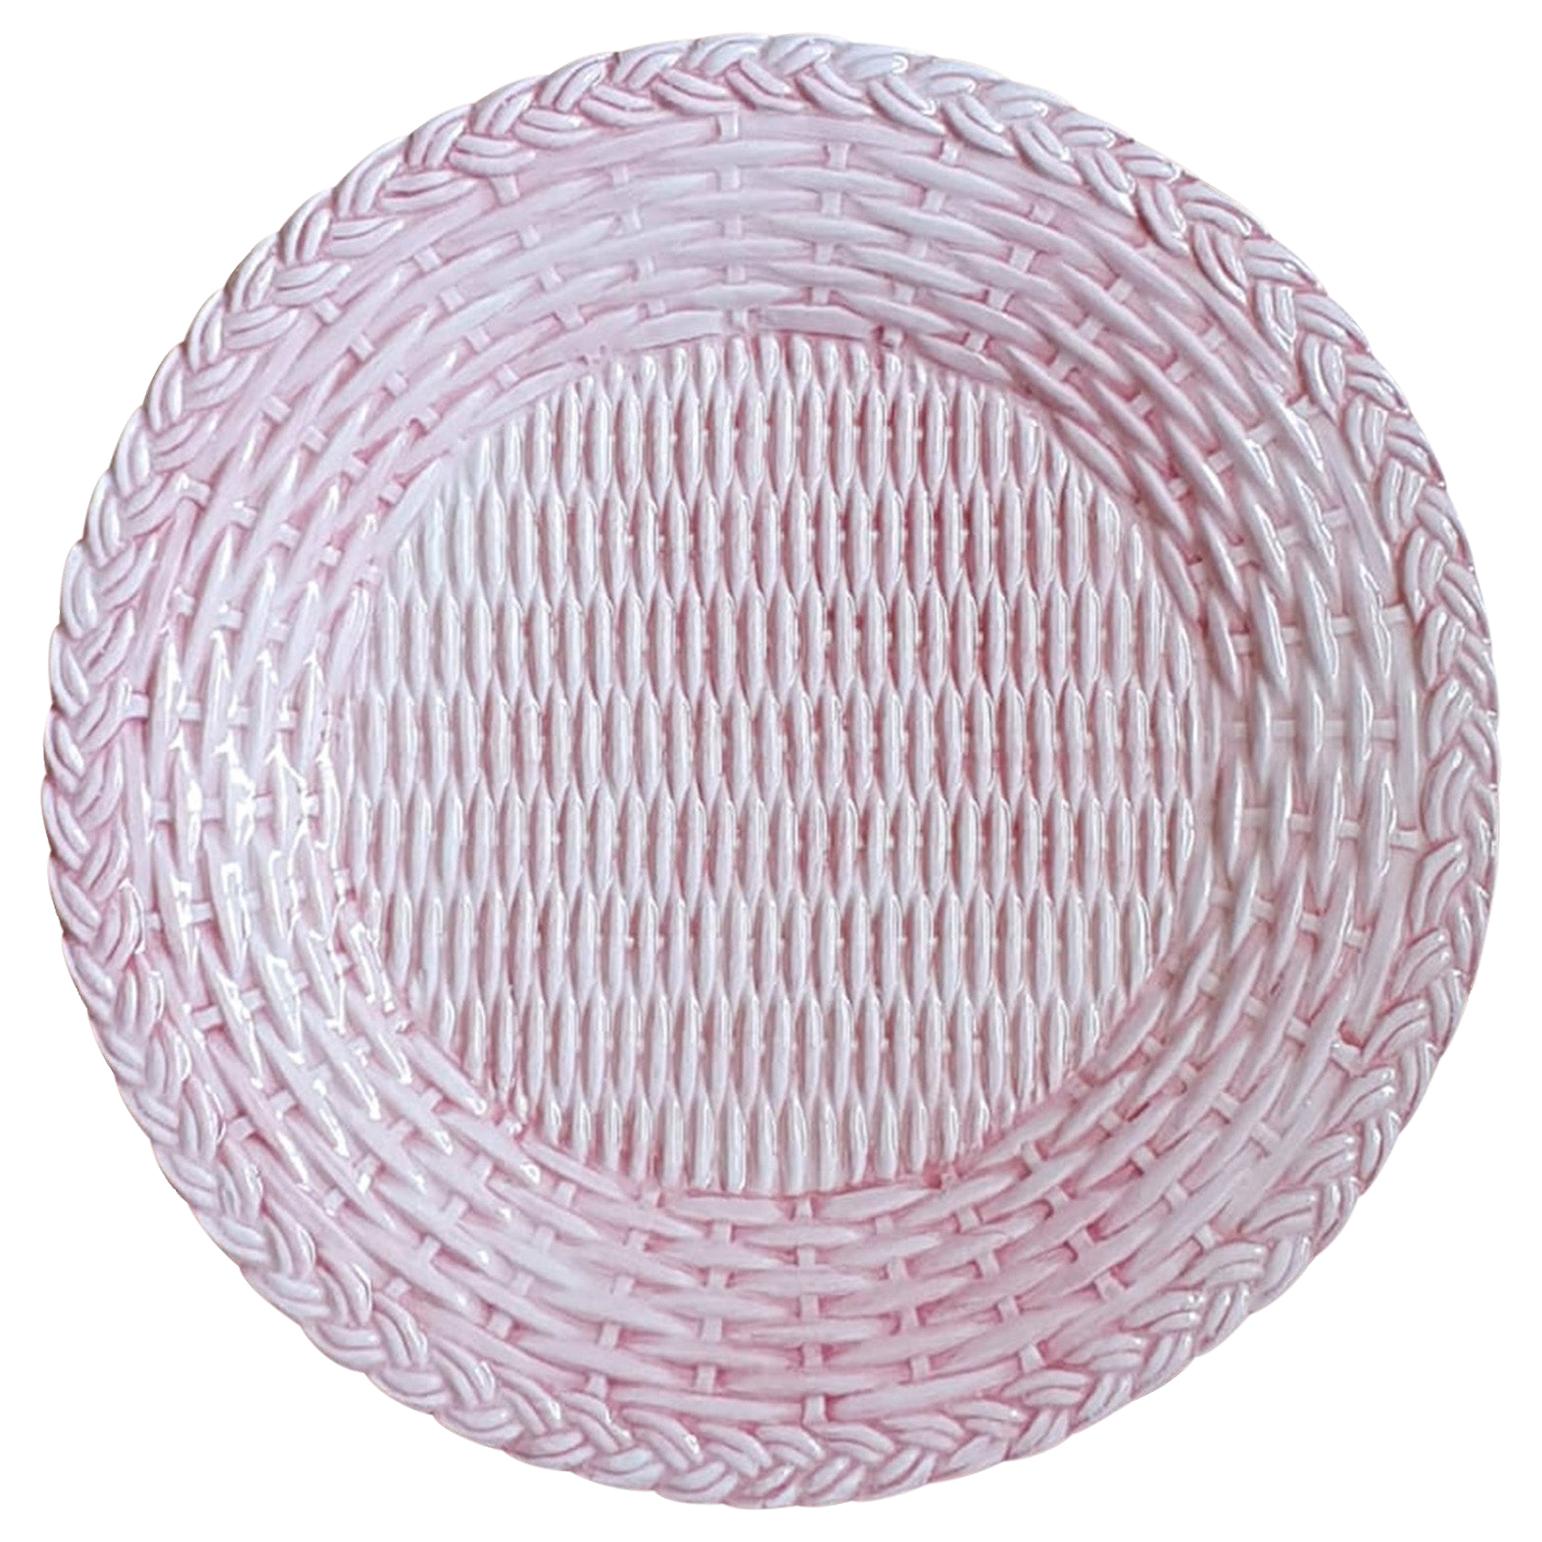 Set of 4 Ceramic Dessert Wicker Pink Plates Made in Italy For Sale